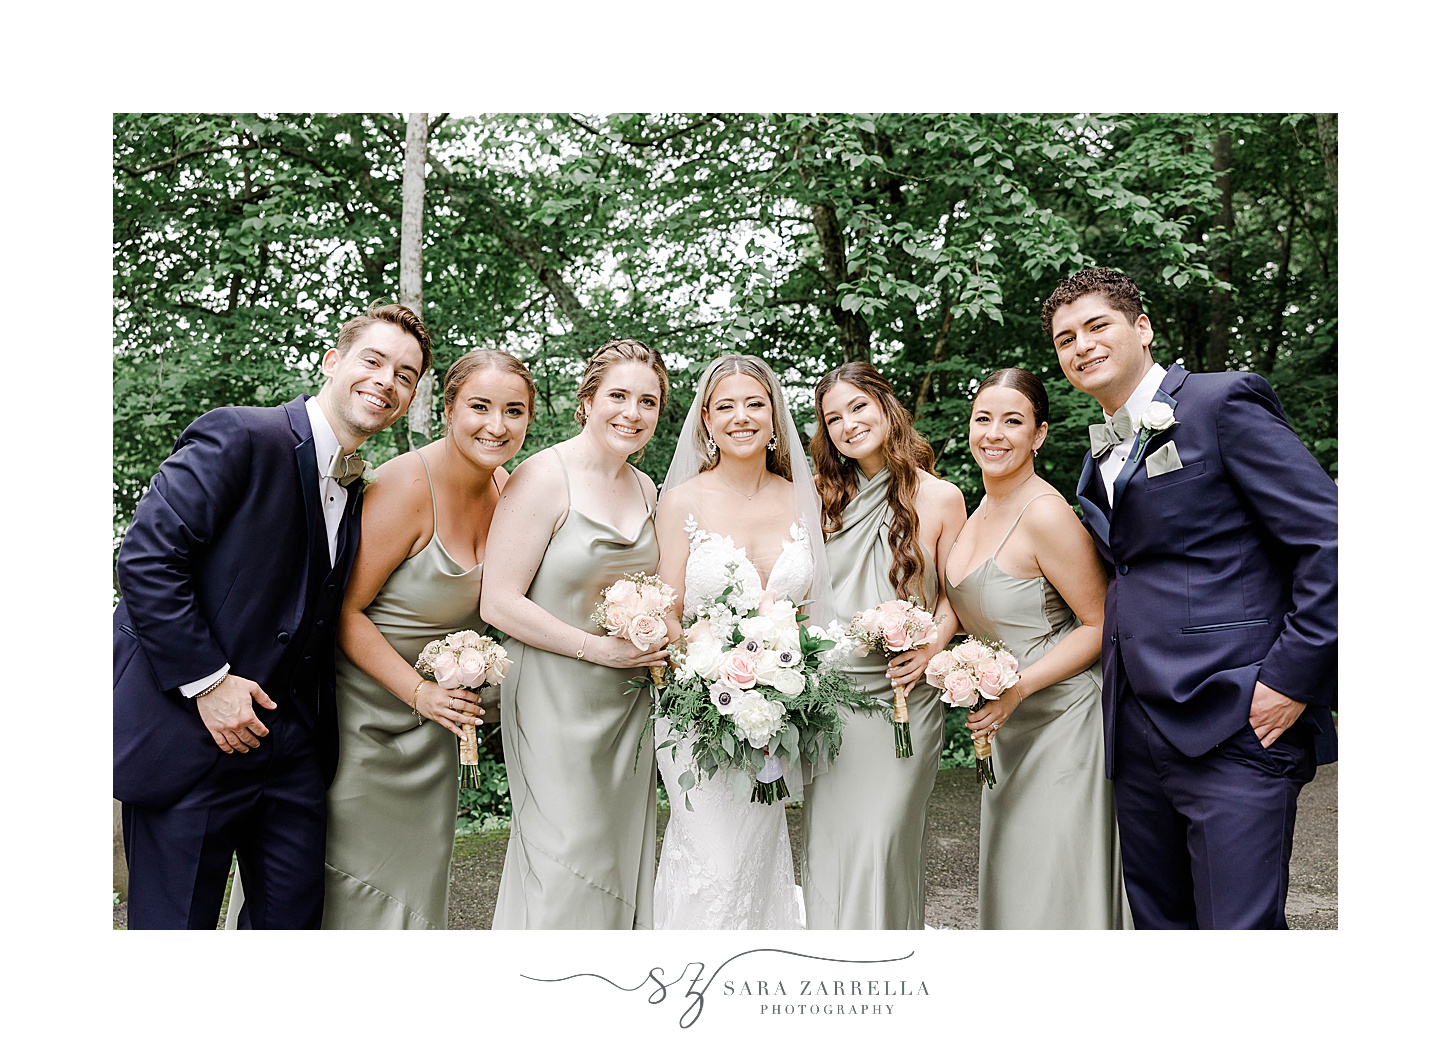 bride poses with bridesmaids in green gowns and men in navy suits 